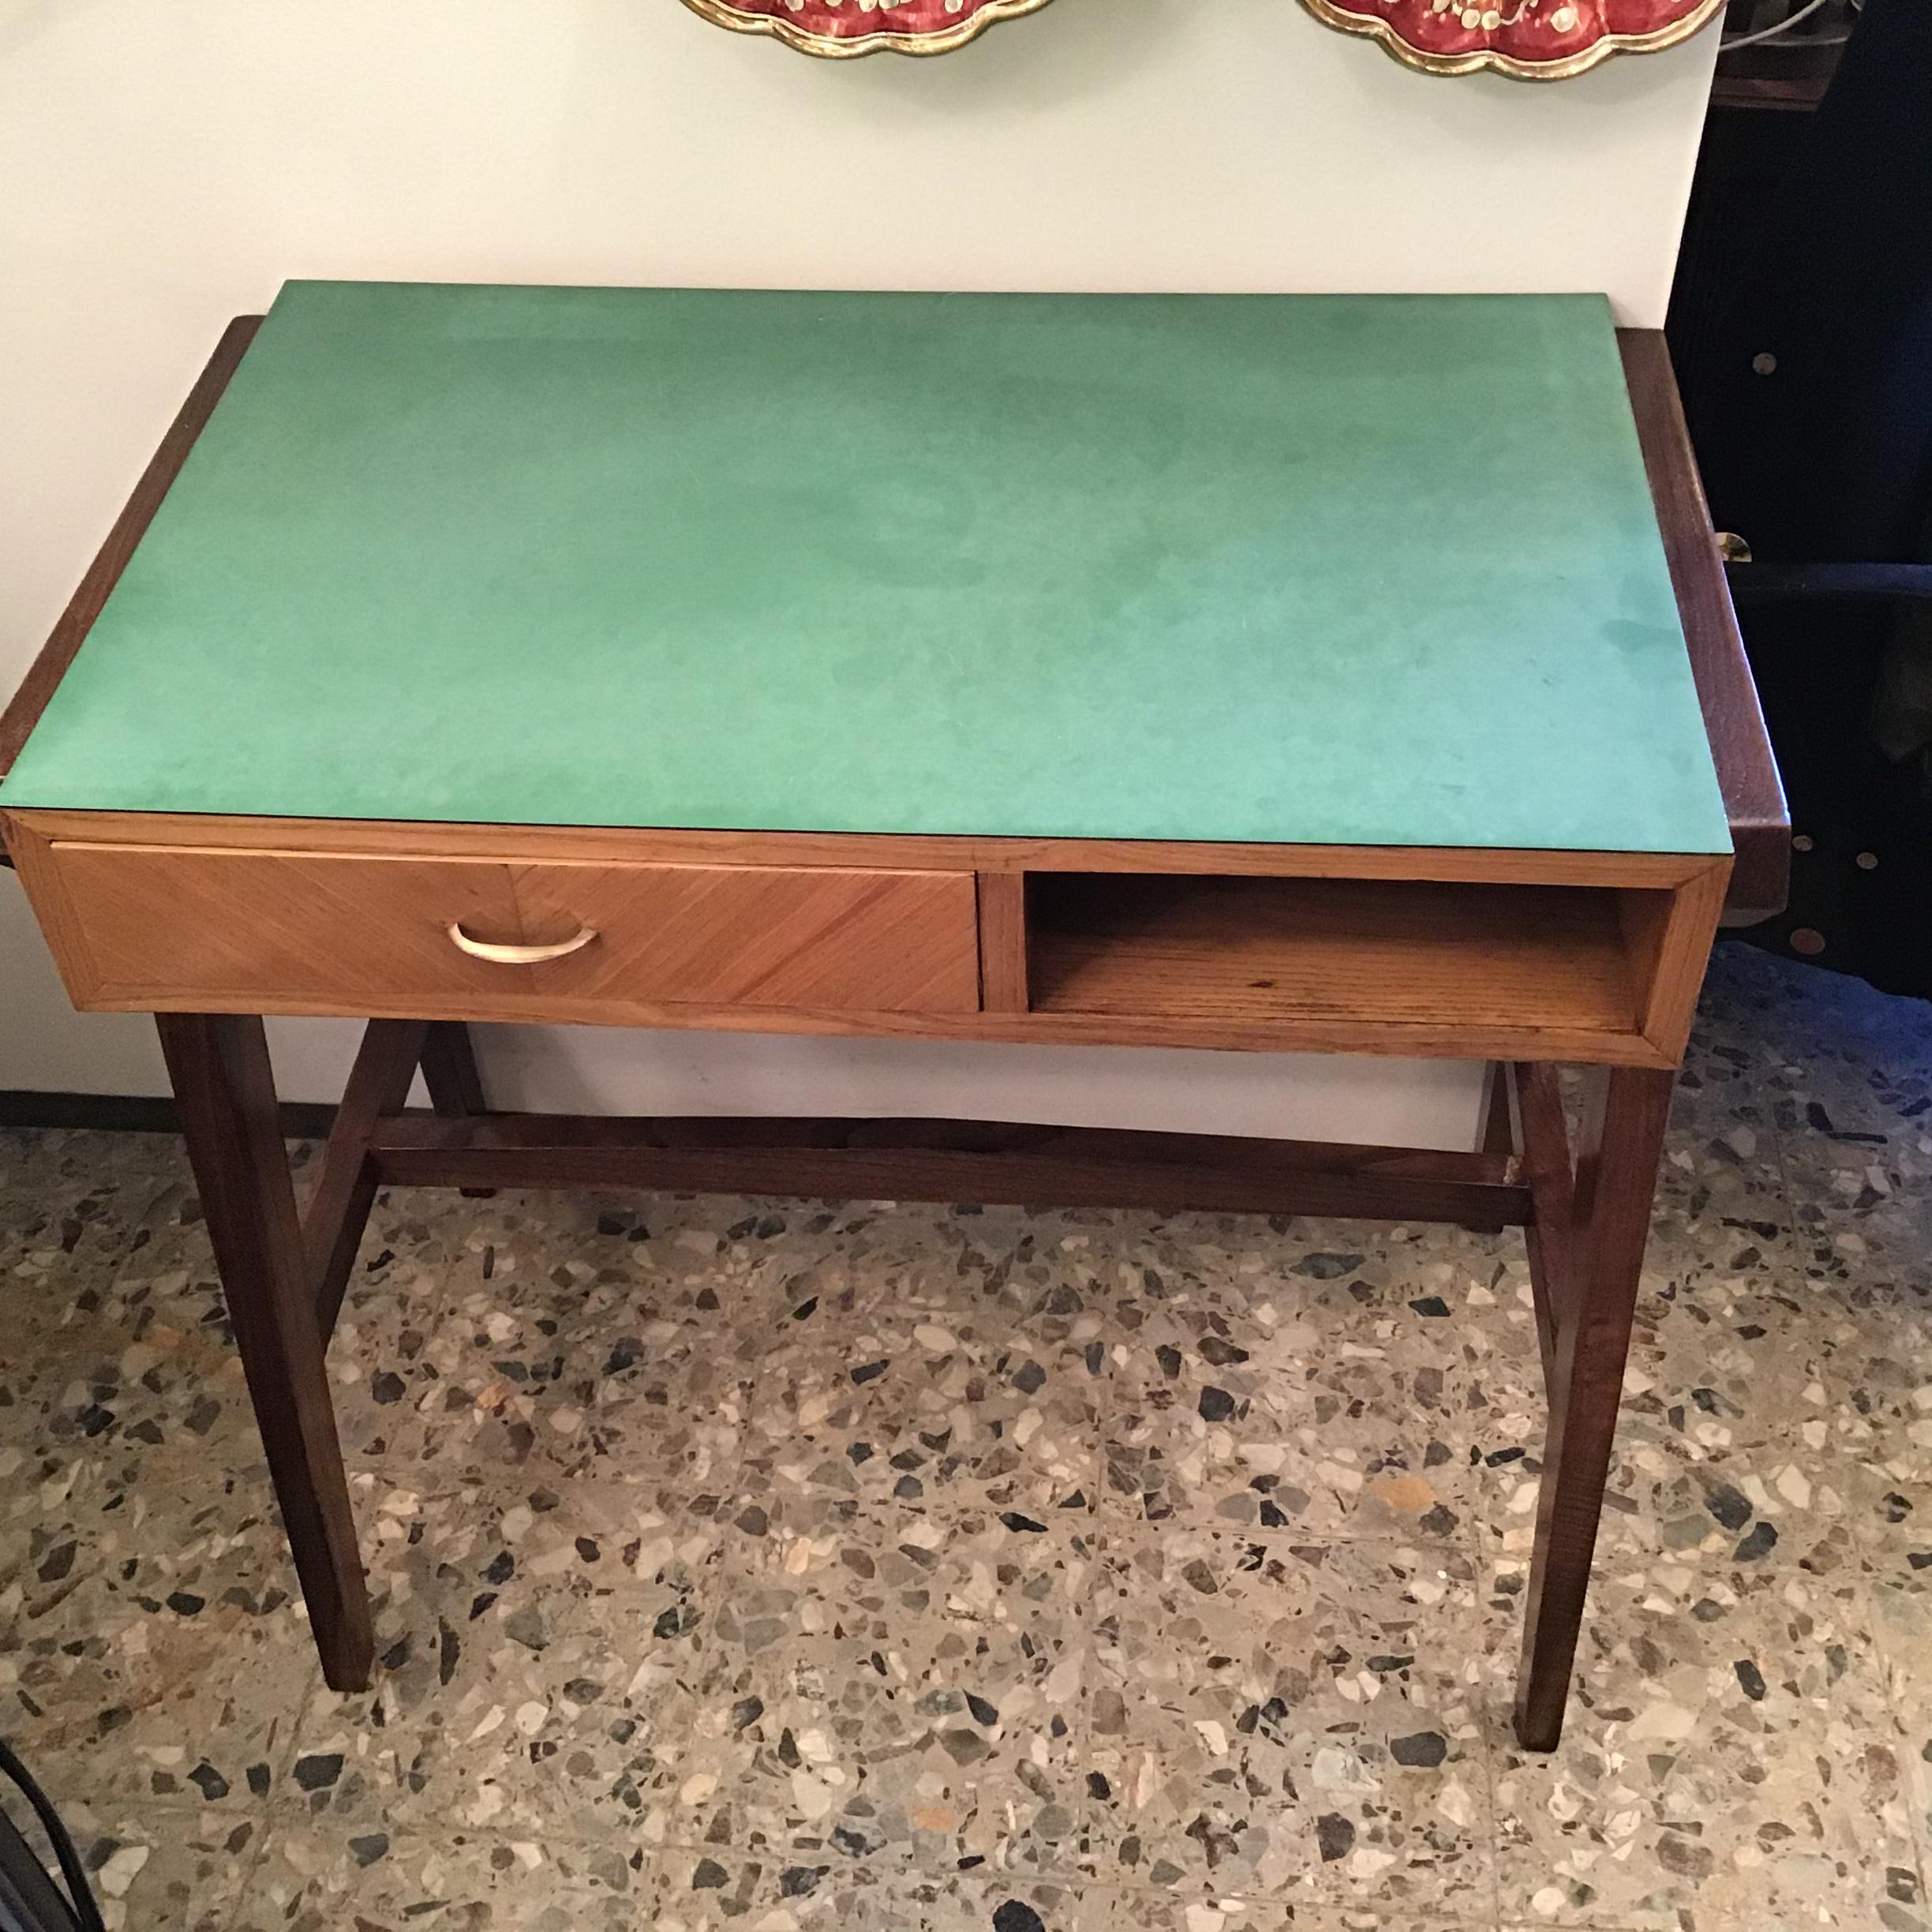 Mid-20th Century Gio Ponti “Stile” Desk Wood Brass, 1950, Italy For Sale